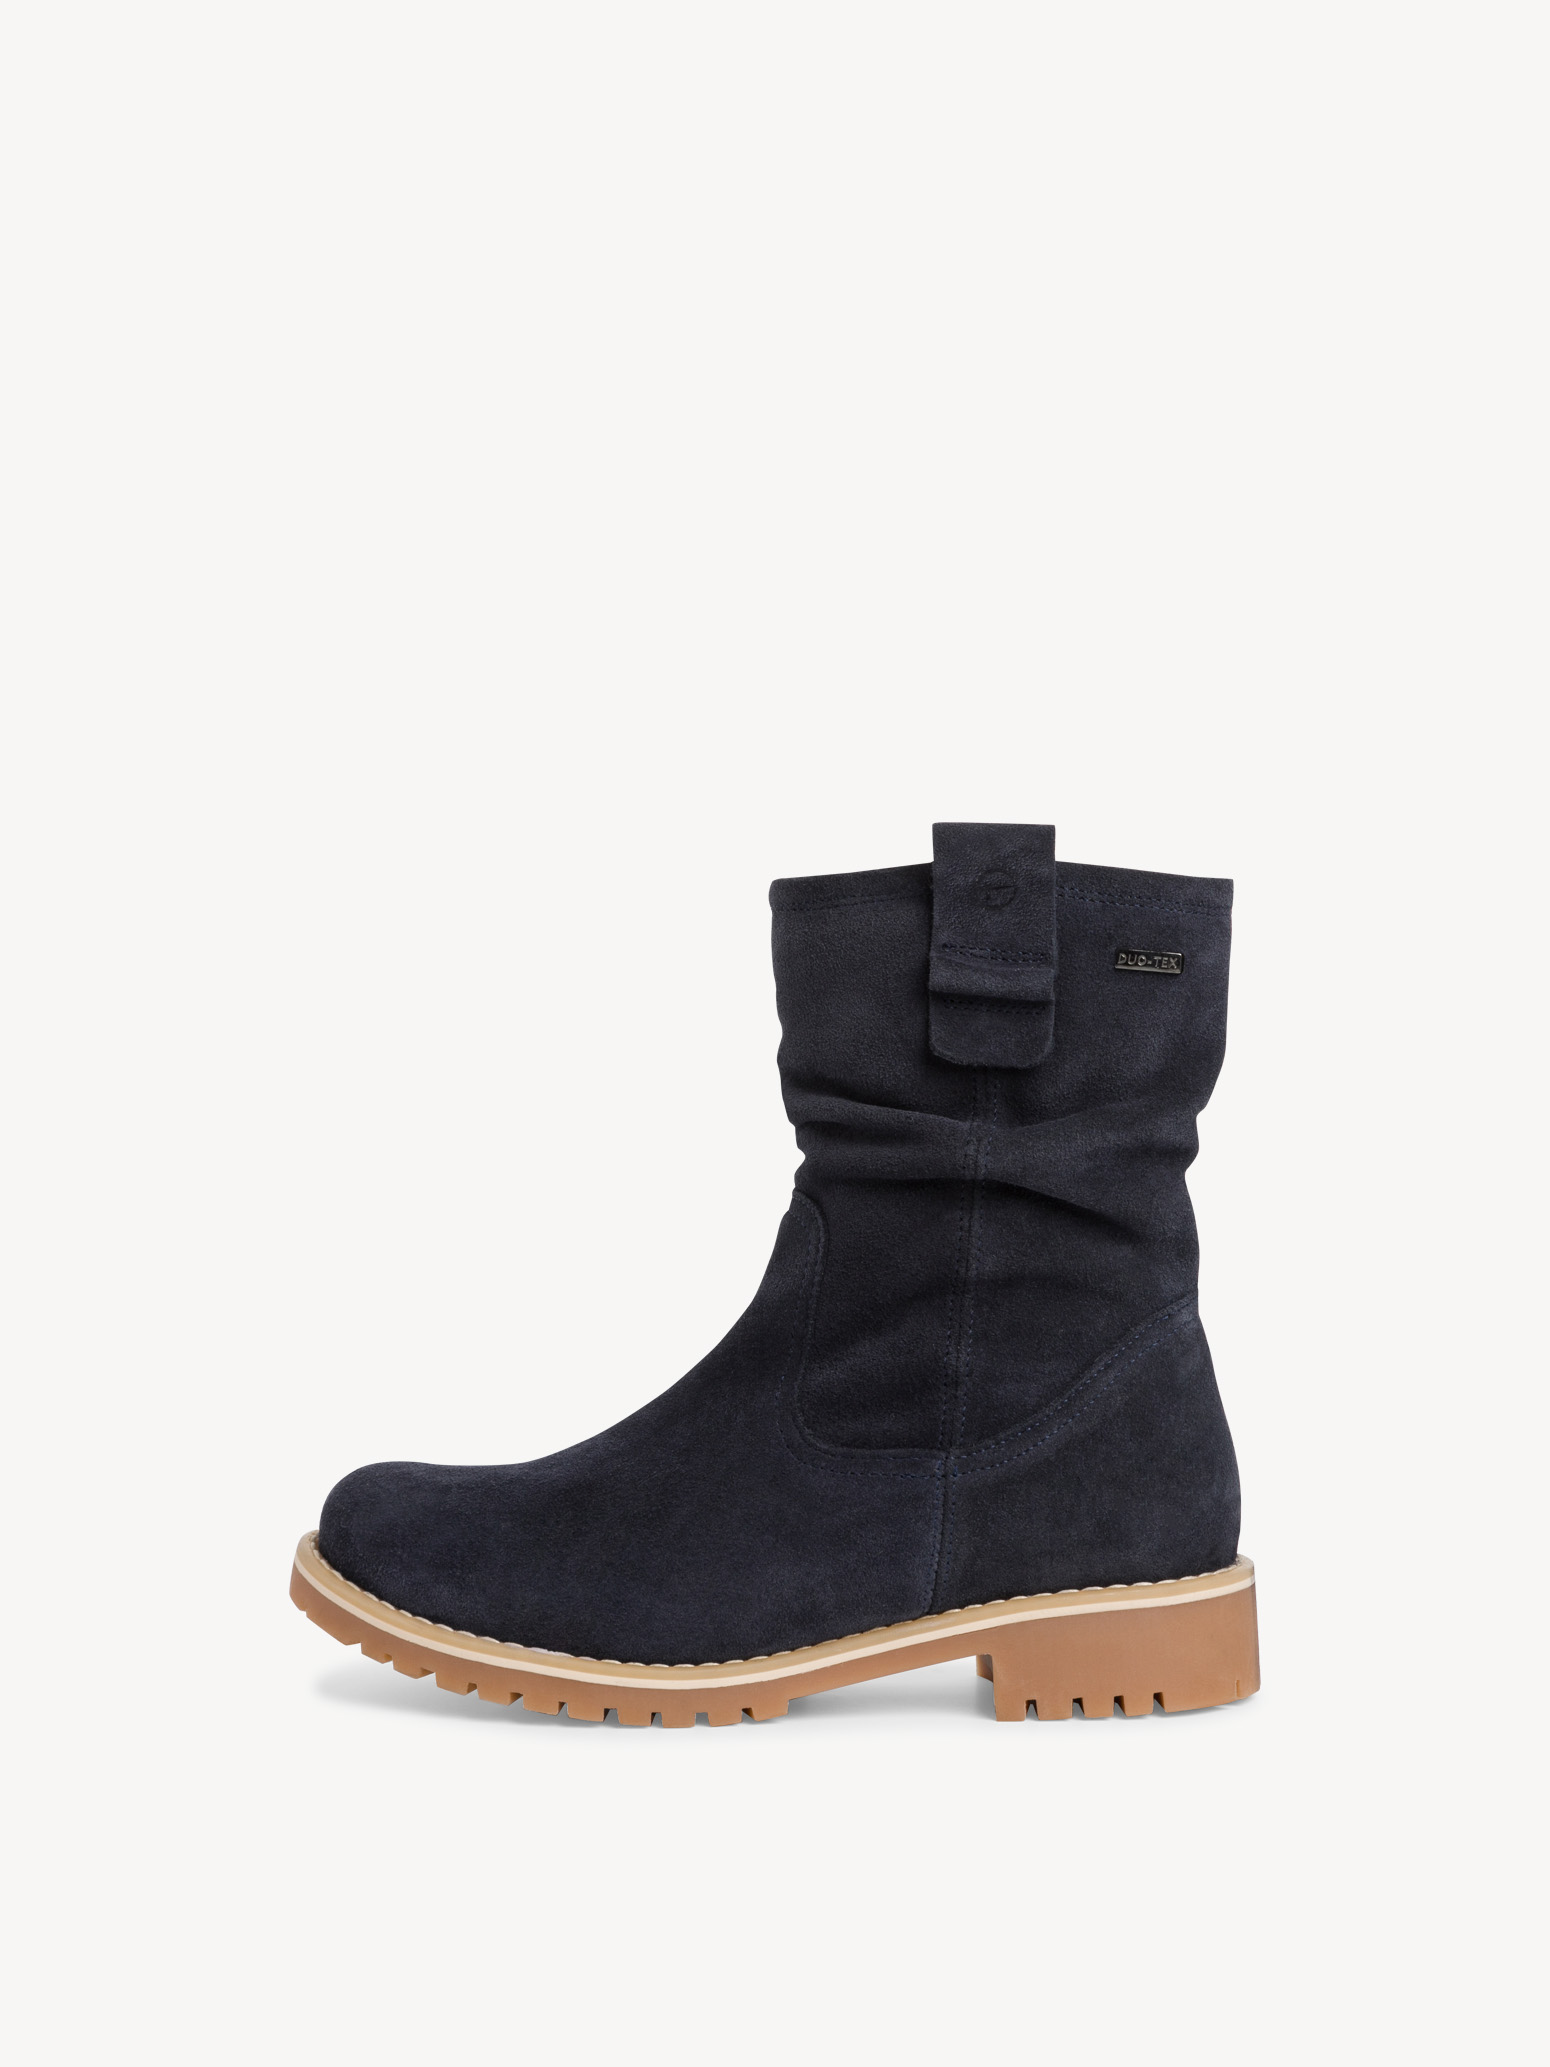 Leather Bootie - blue warm lining, NAVY, hi-res